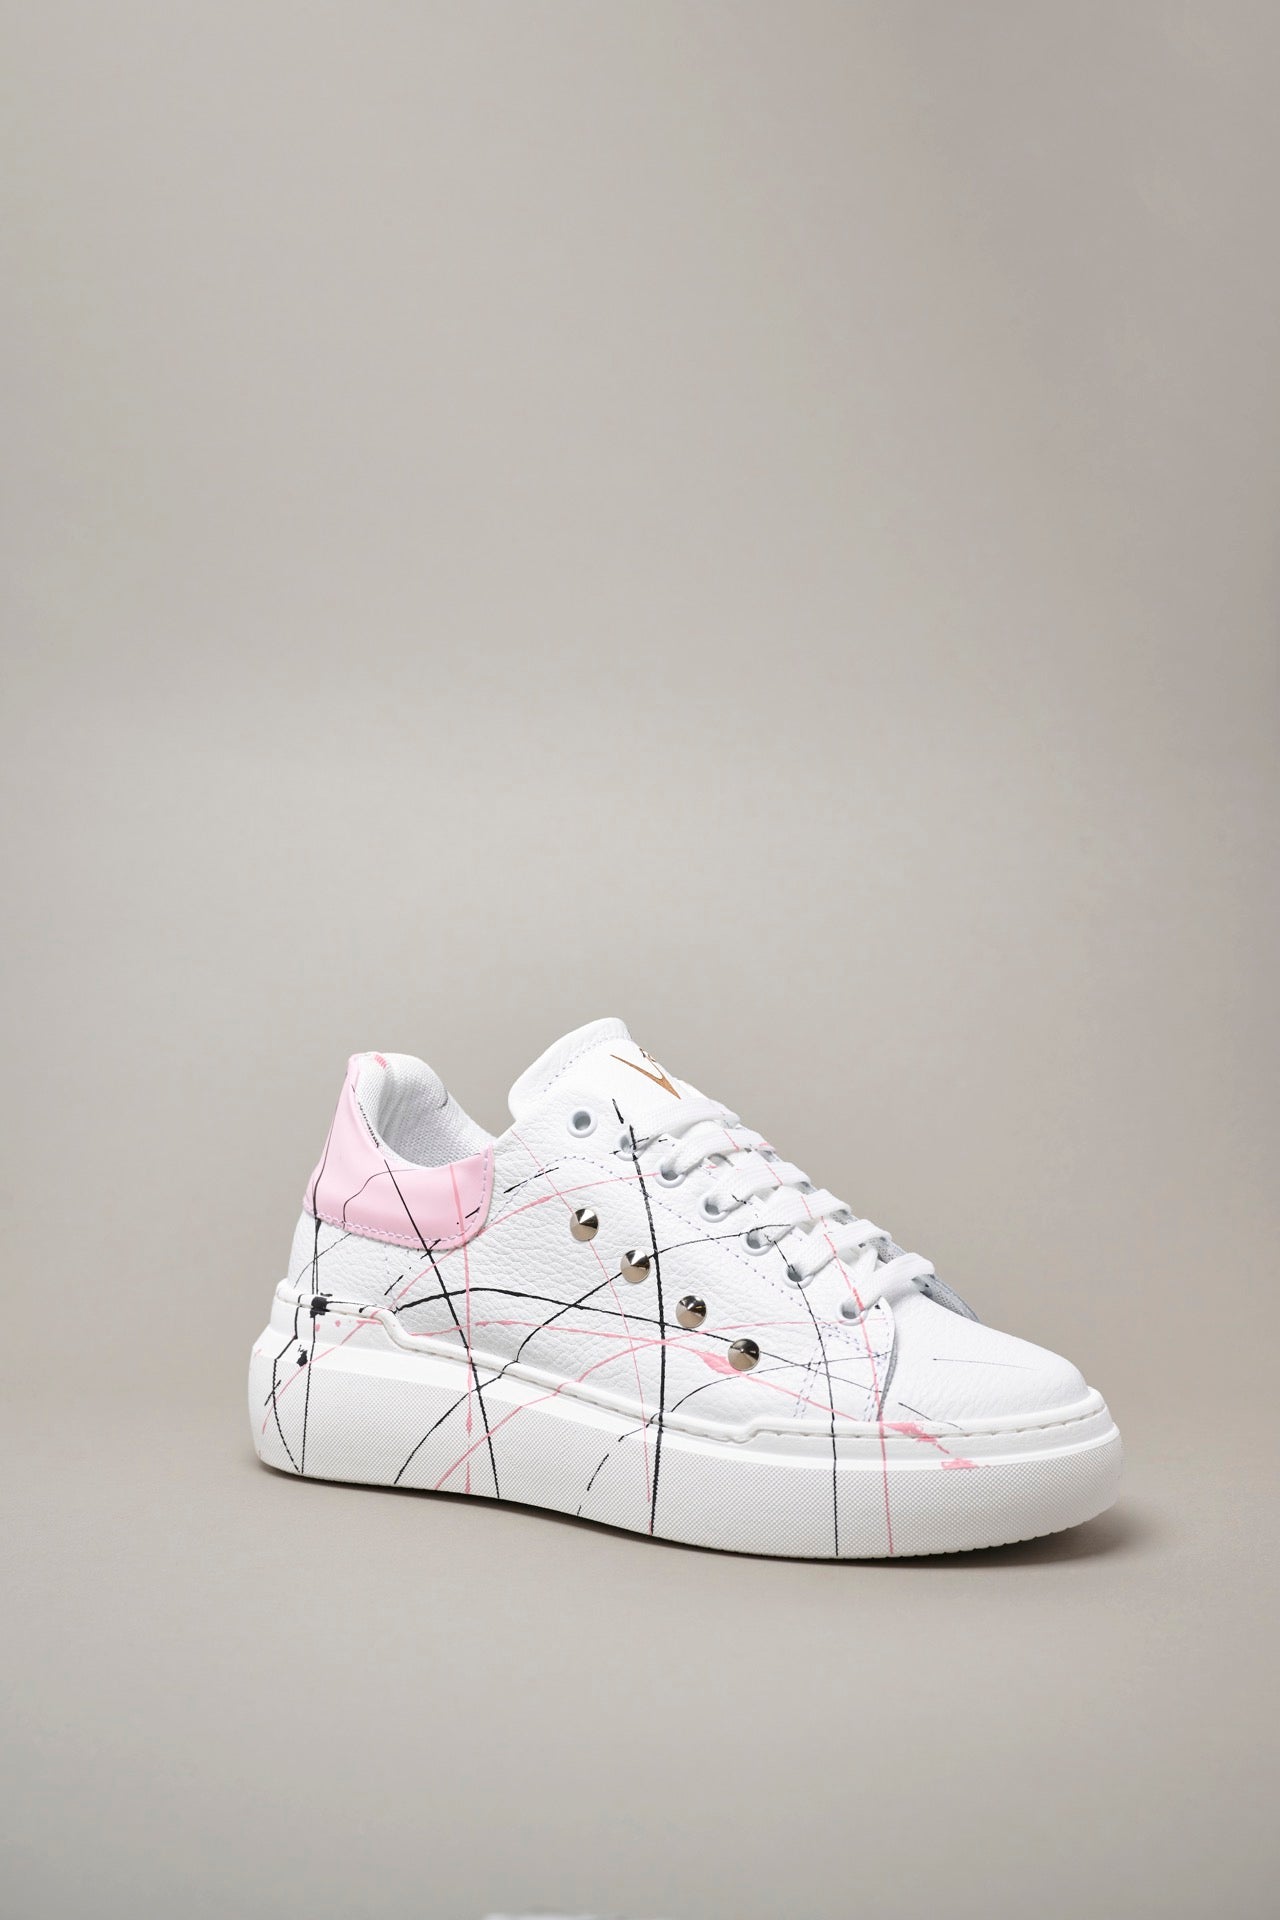 HAMMER - High sole sneakers in hammered leather with Pastel Pink back with studs and splashes of paint